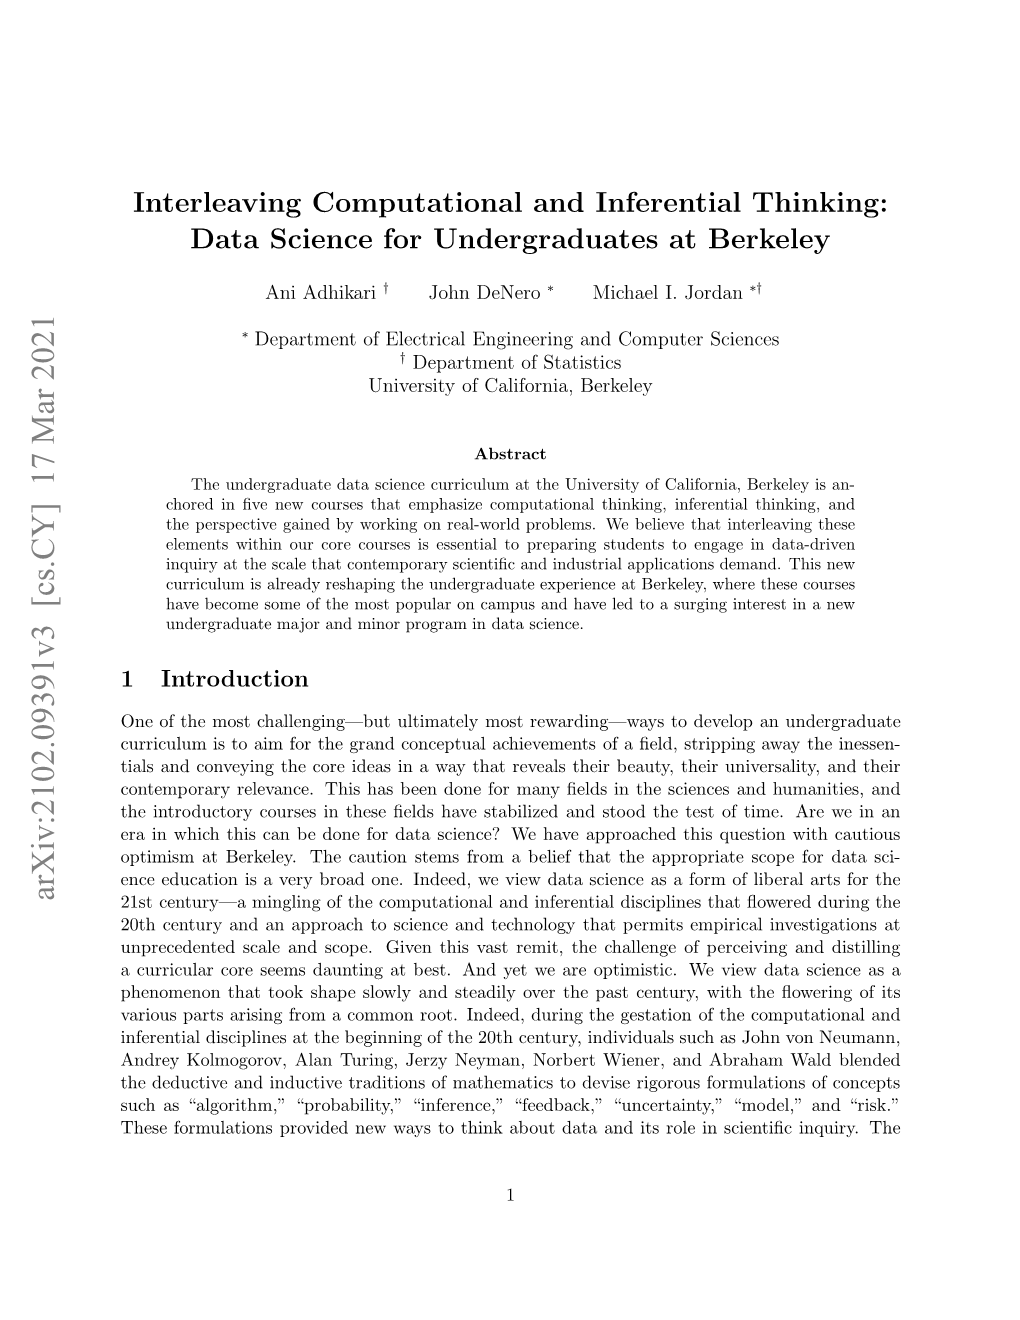 Interleaving Computational and Inferential Thinking: Data Science